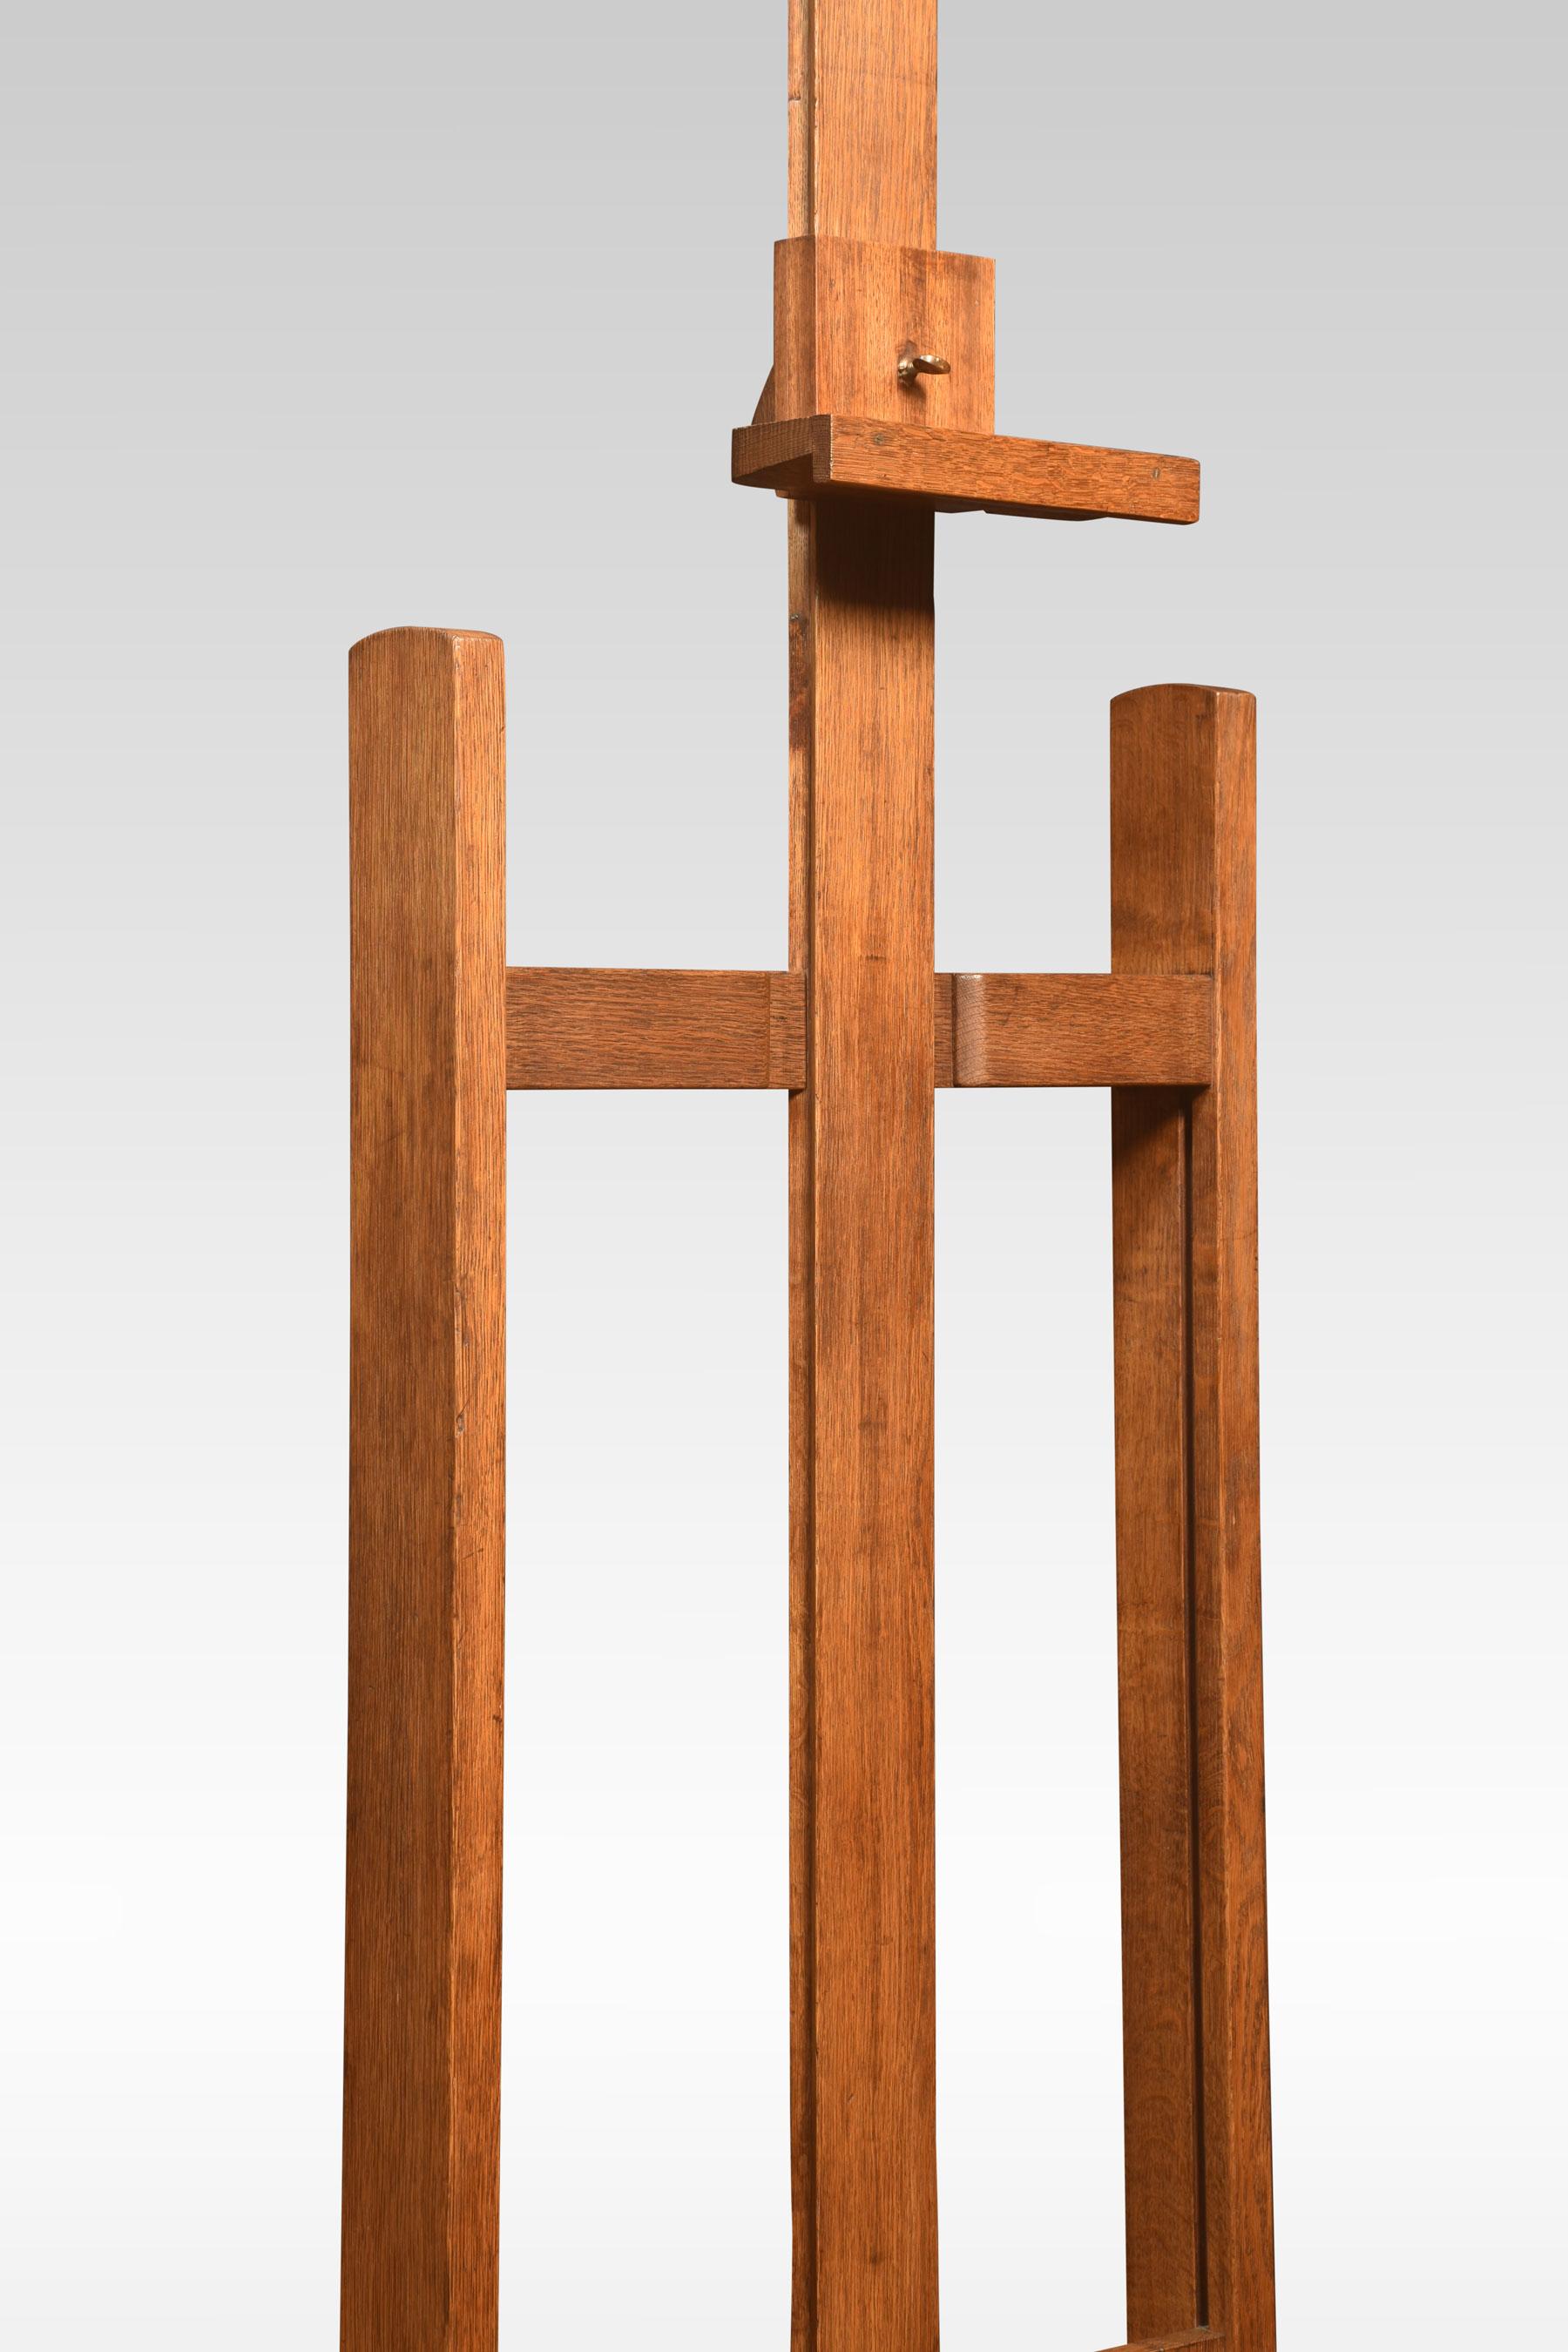 Oak artist’s adjustable studio easel raised up on trestle base terminating in casters.
Dimensions
Height 73 Inches adjustable to 106.5 Inches
Width 24 Inches
Depth 28 Inches.